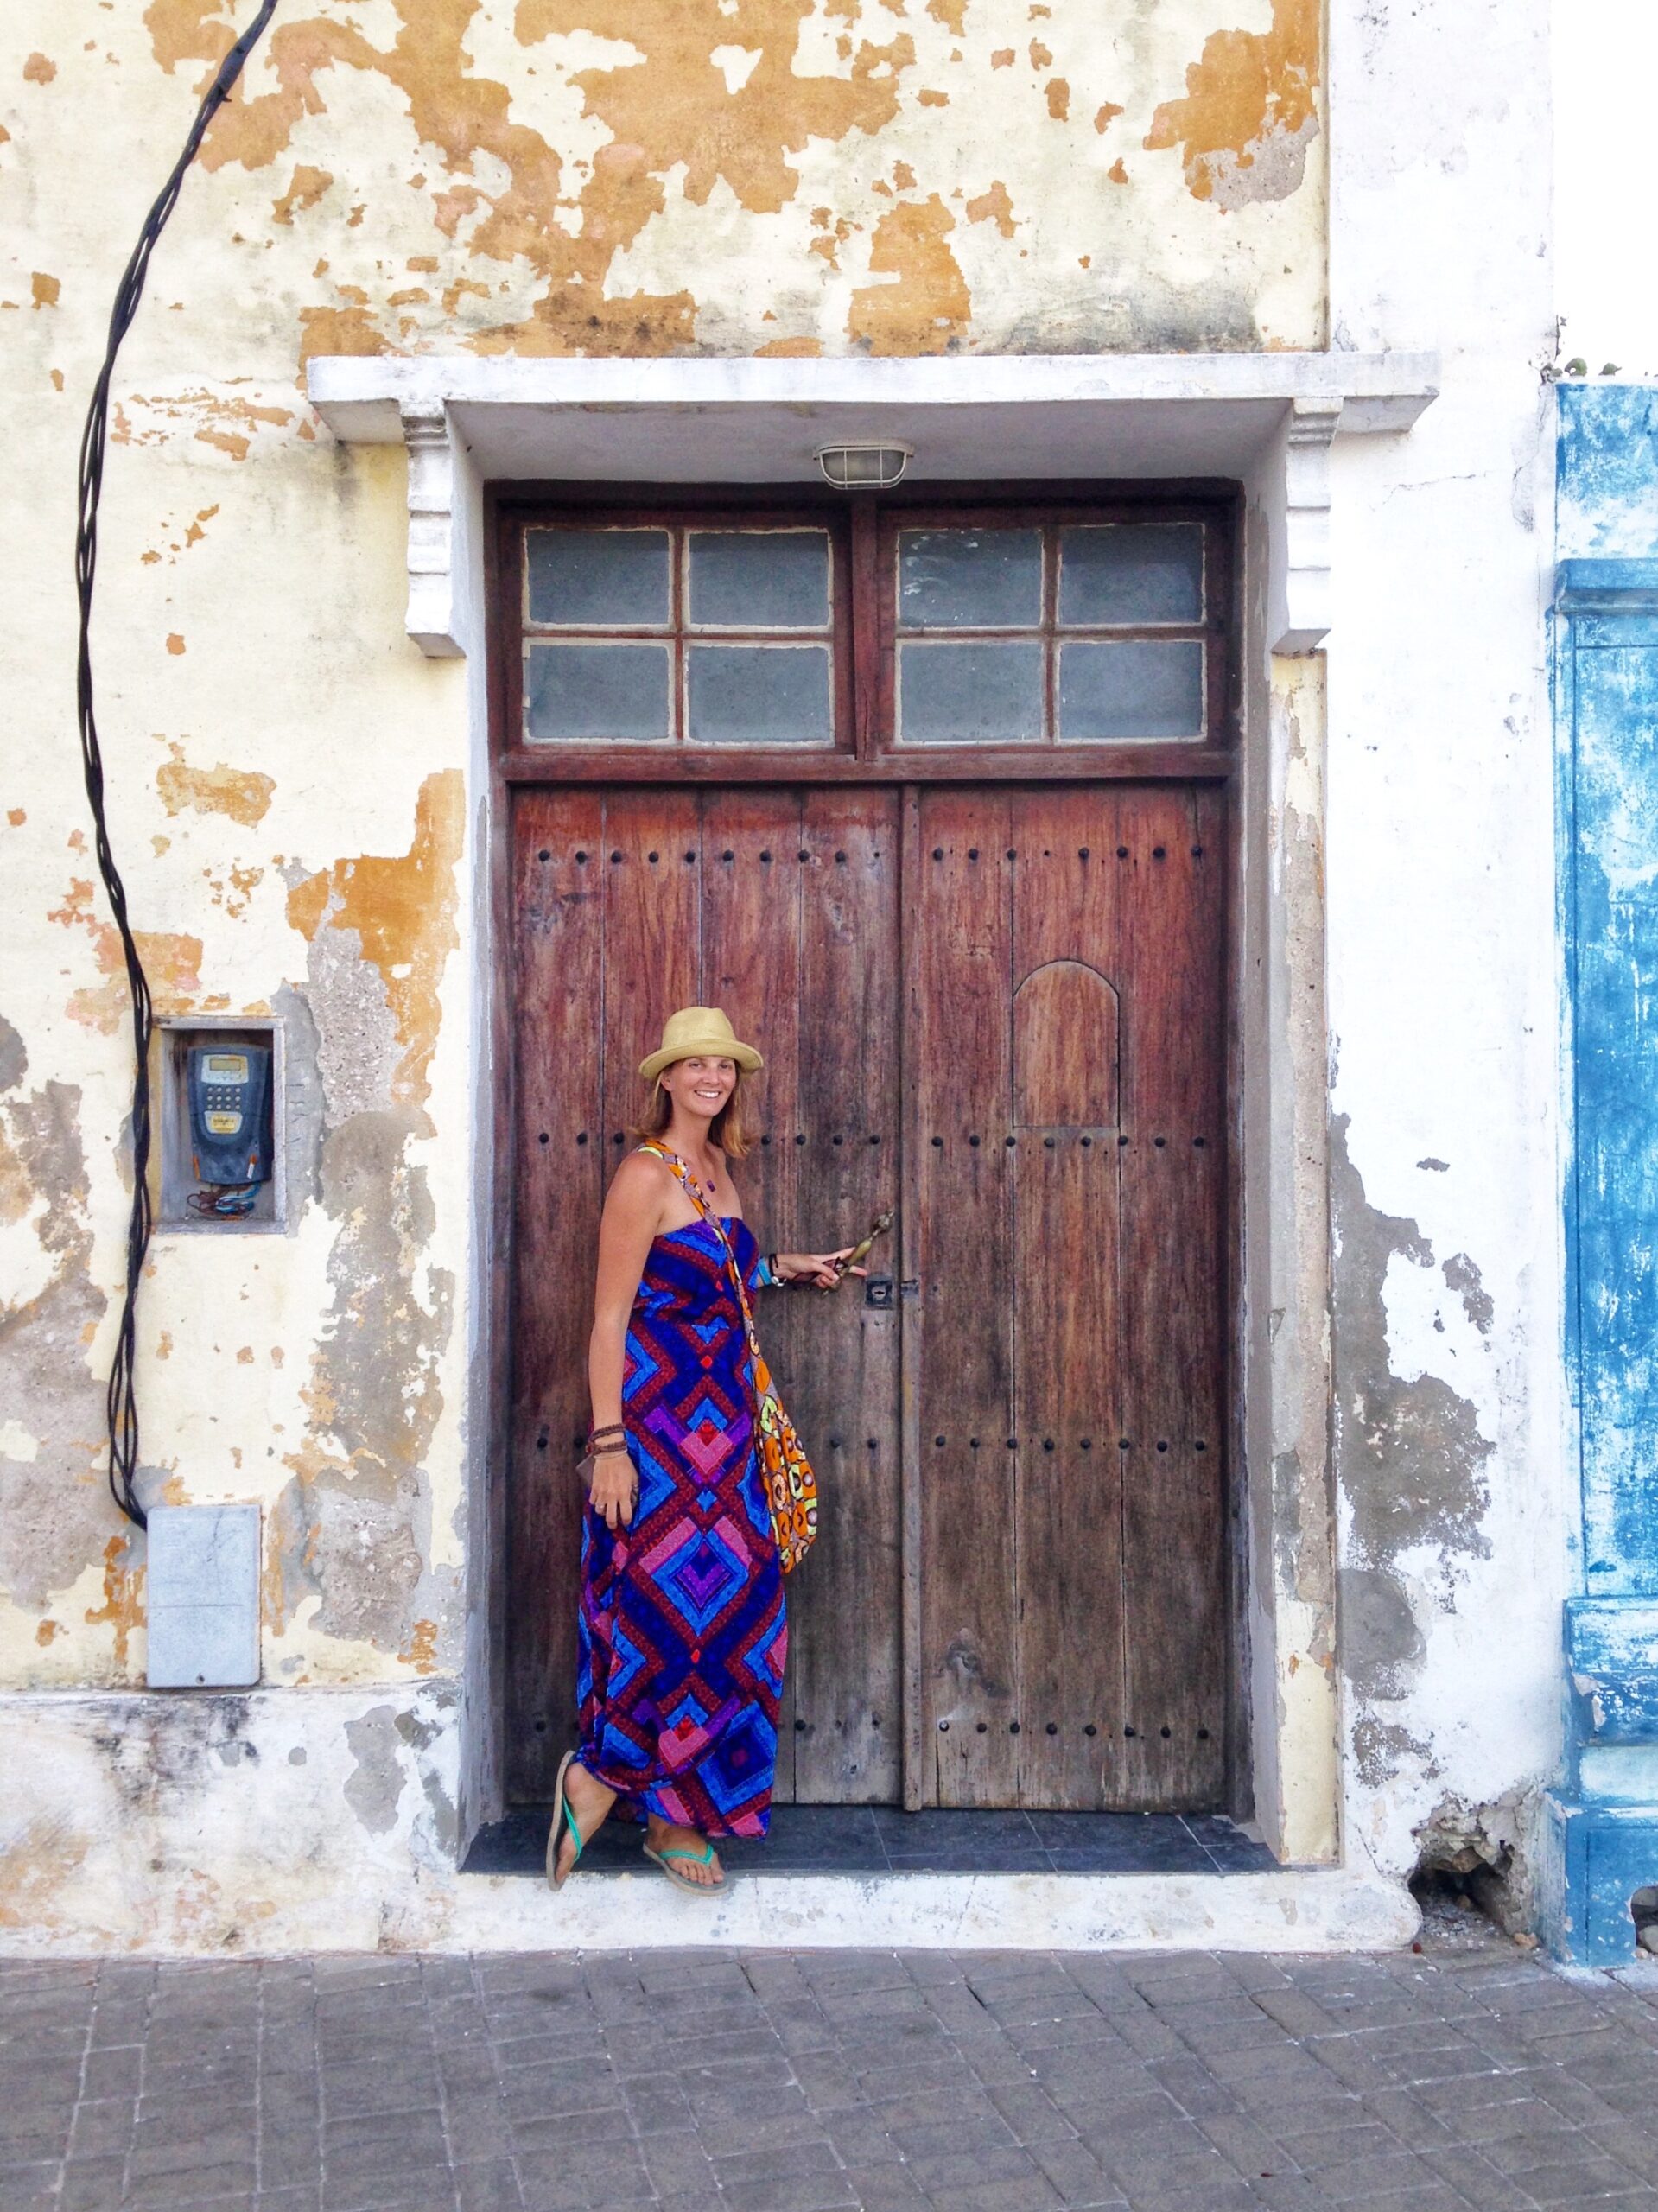 Lady at a door in Mozambique